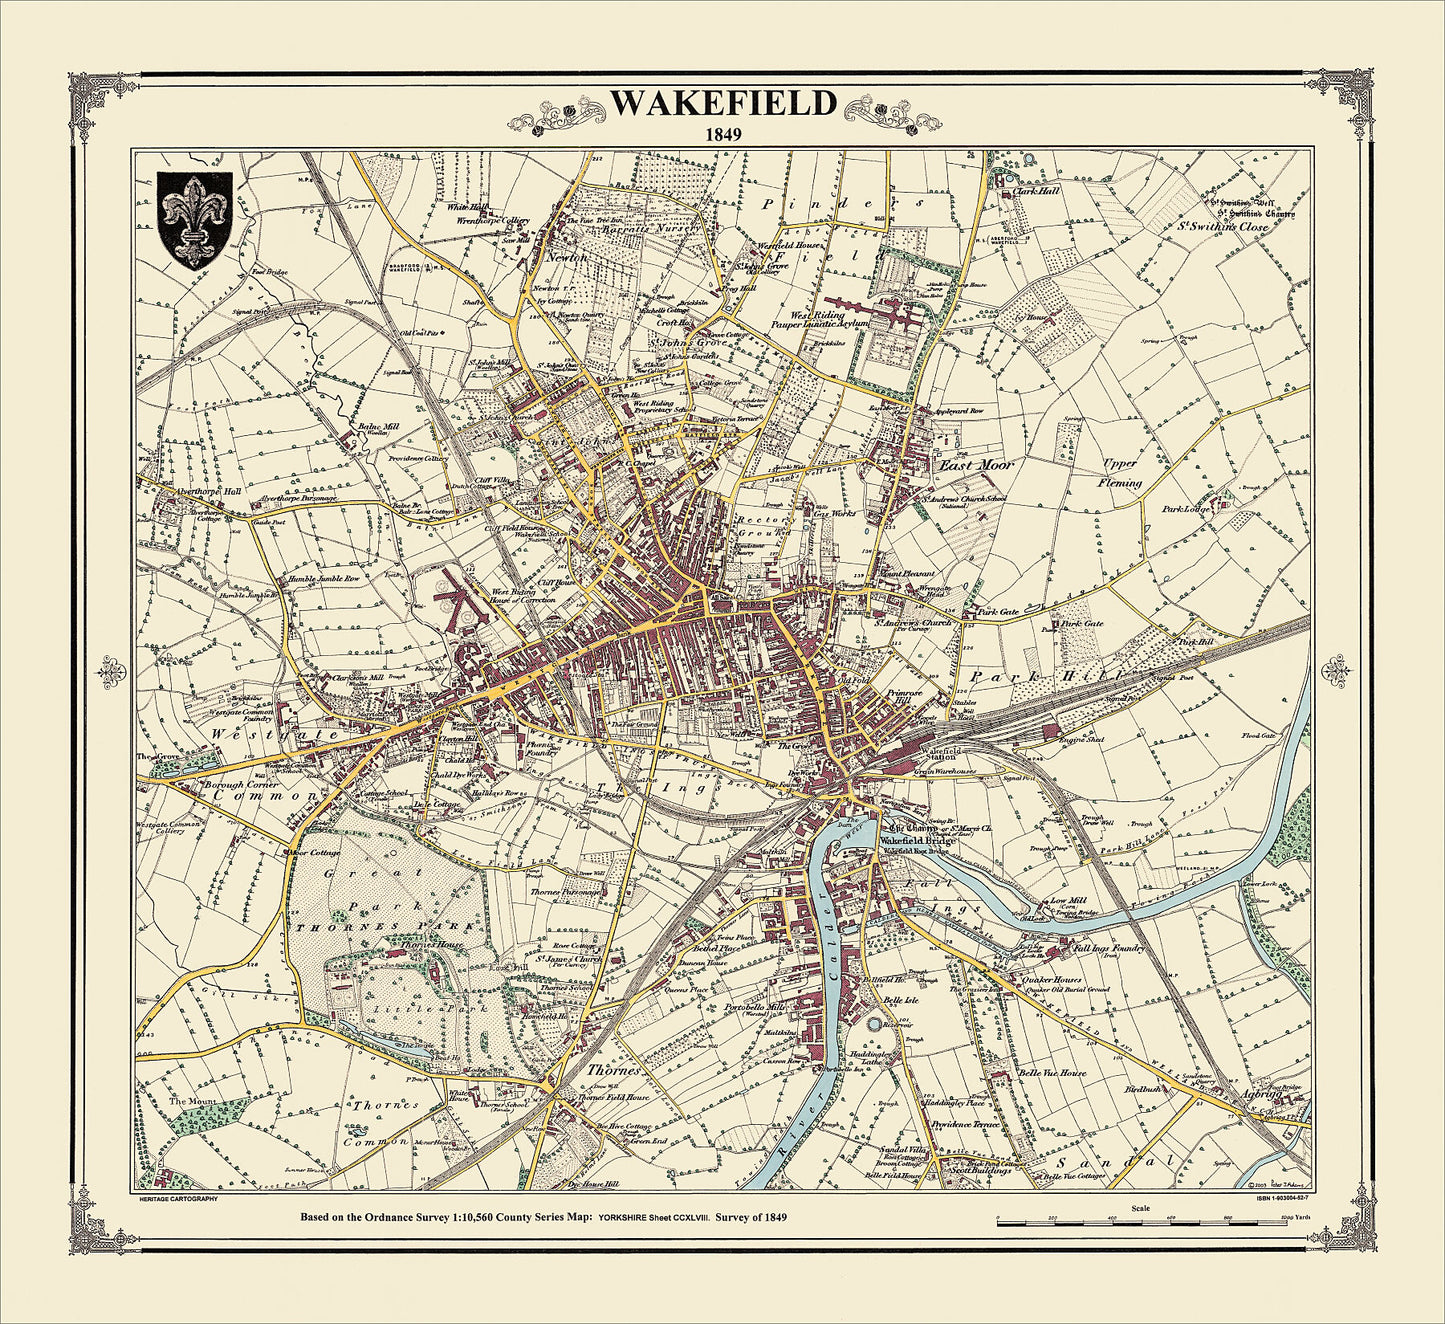 Coloured Victorian map of Wakefield in 1849 by Peter J Adams of Heritage Cartography